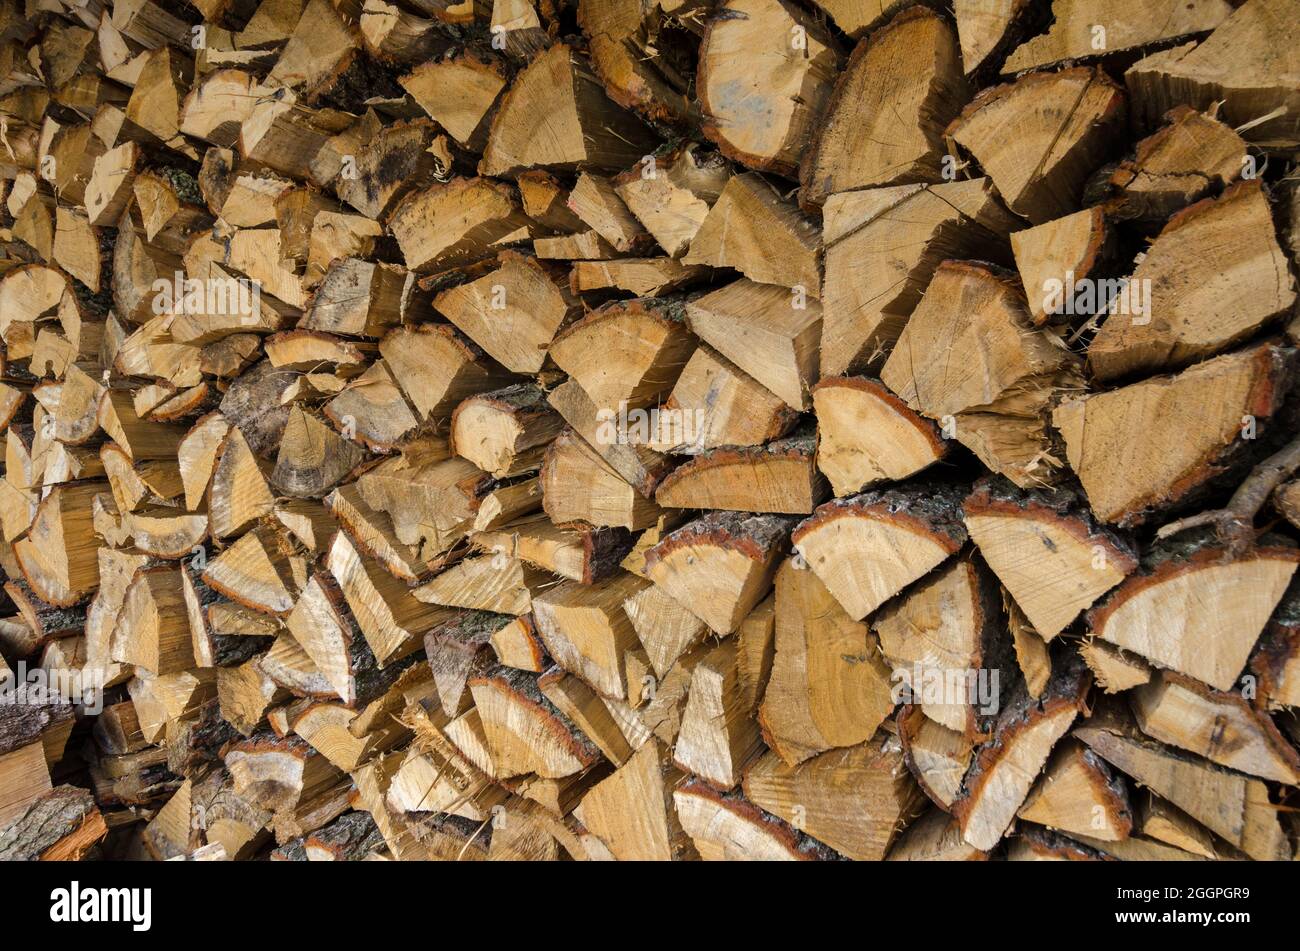 A Neatly Cut And Stacked Pile Of Firewood Seasoning Stock Photo